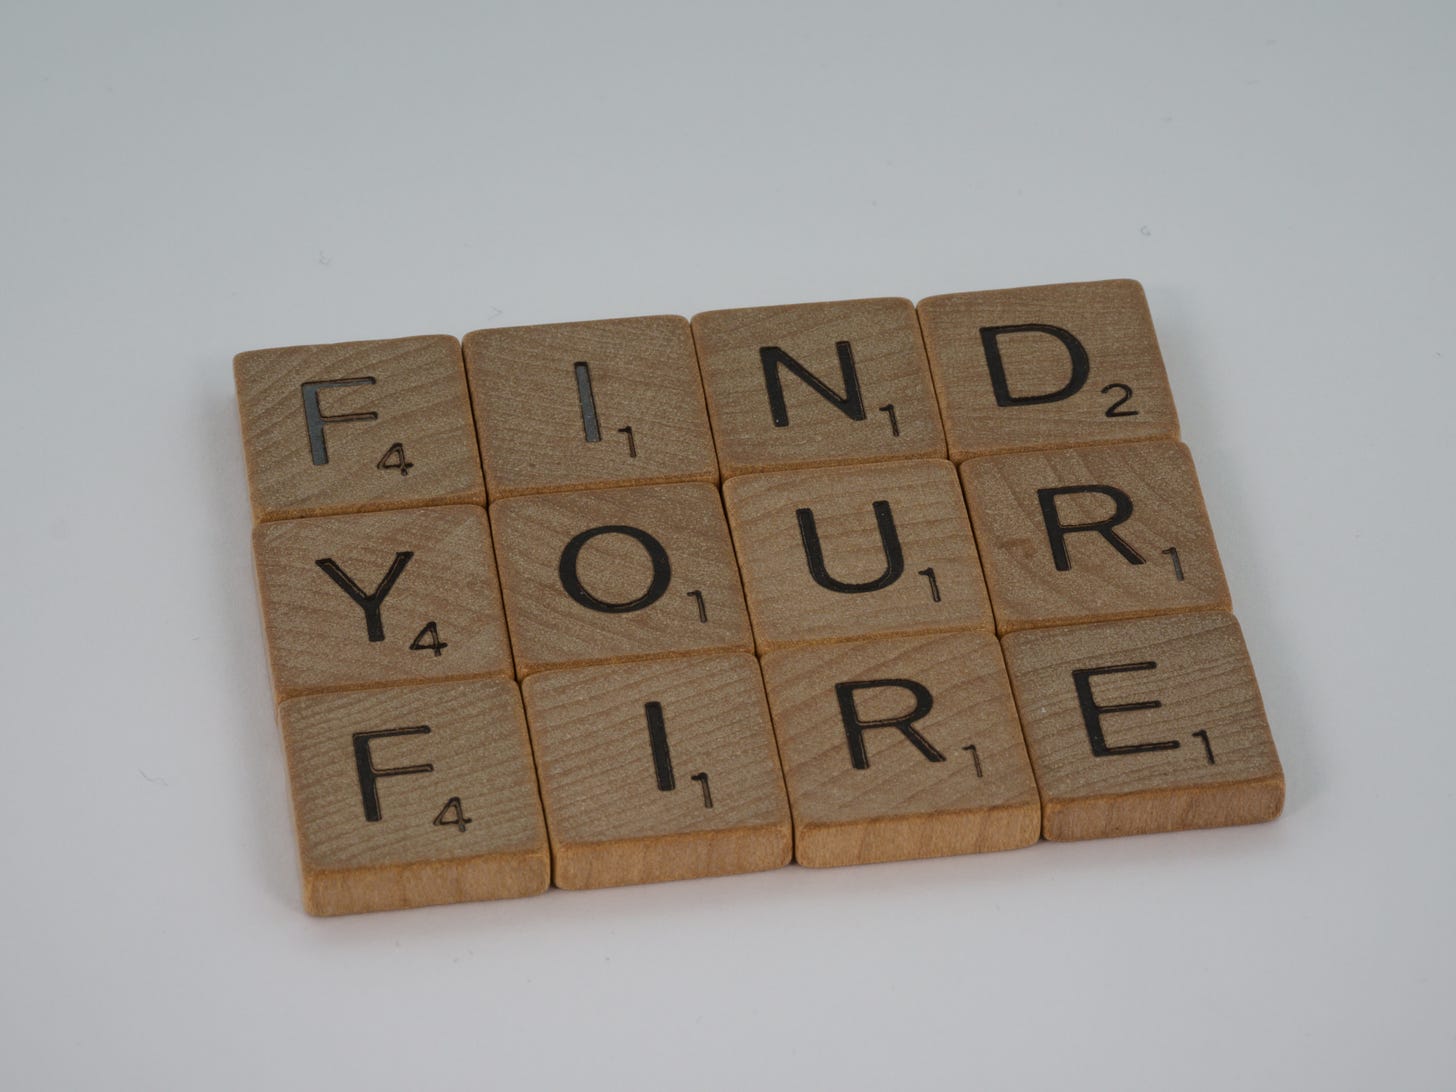 scrabble tiles that read "find your fire"